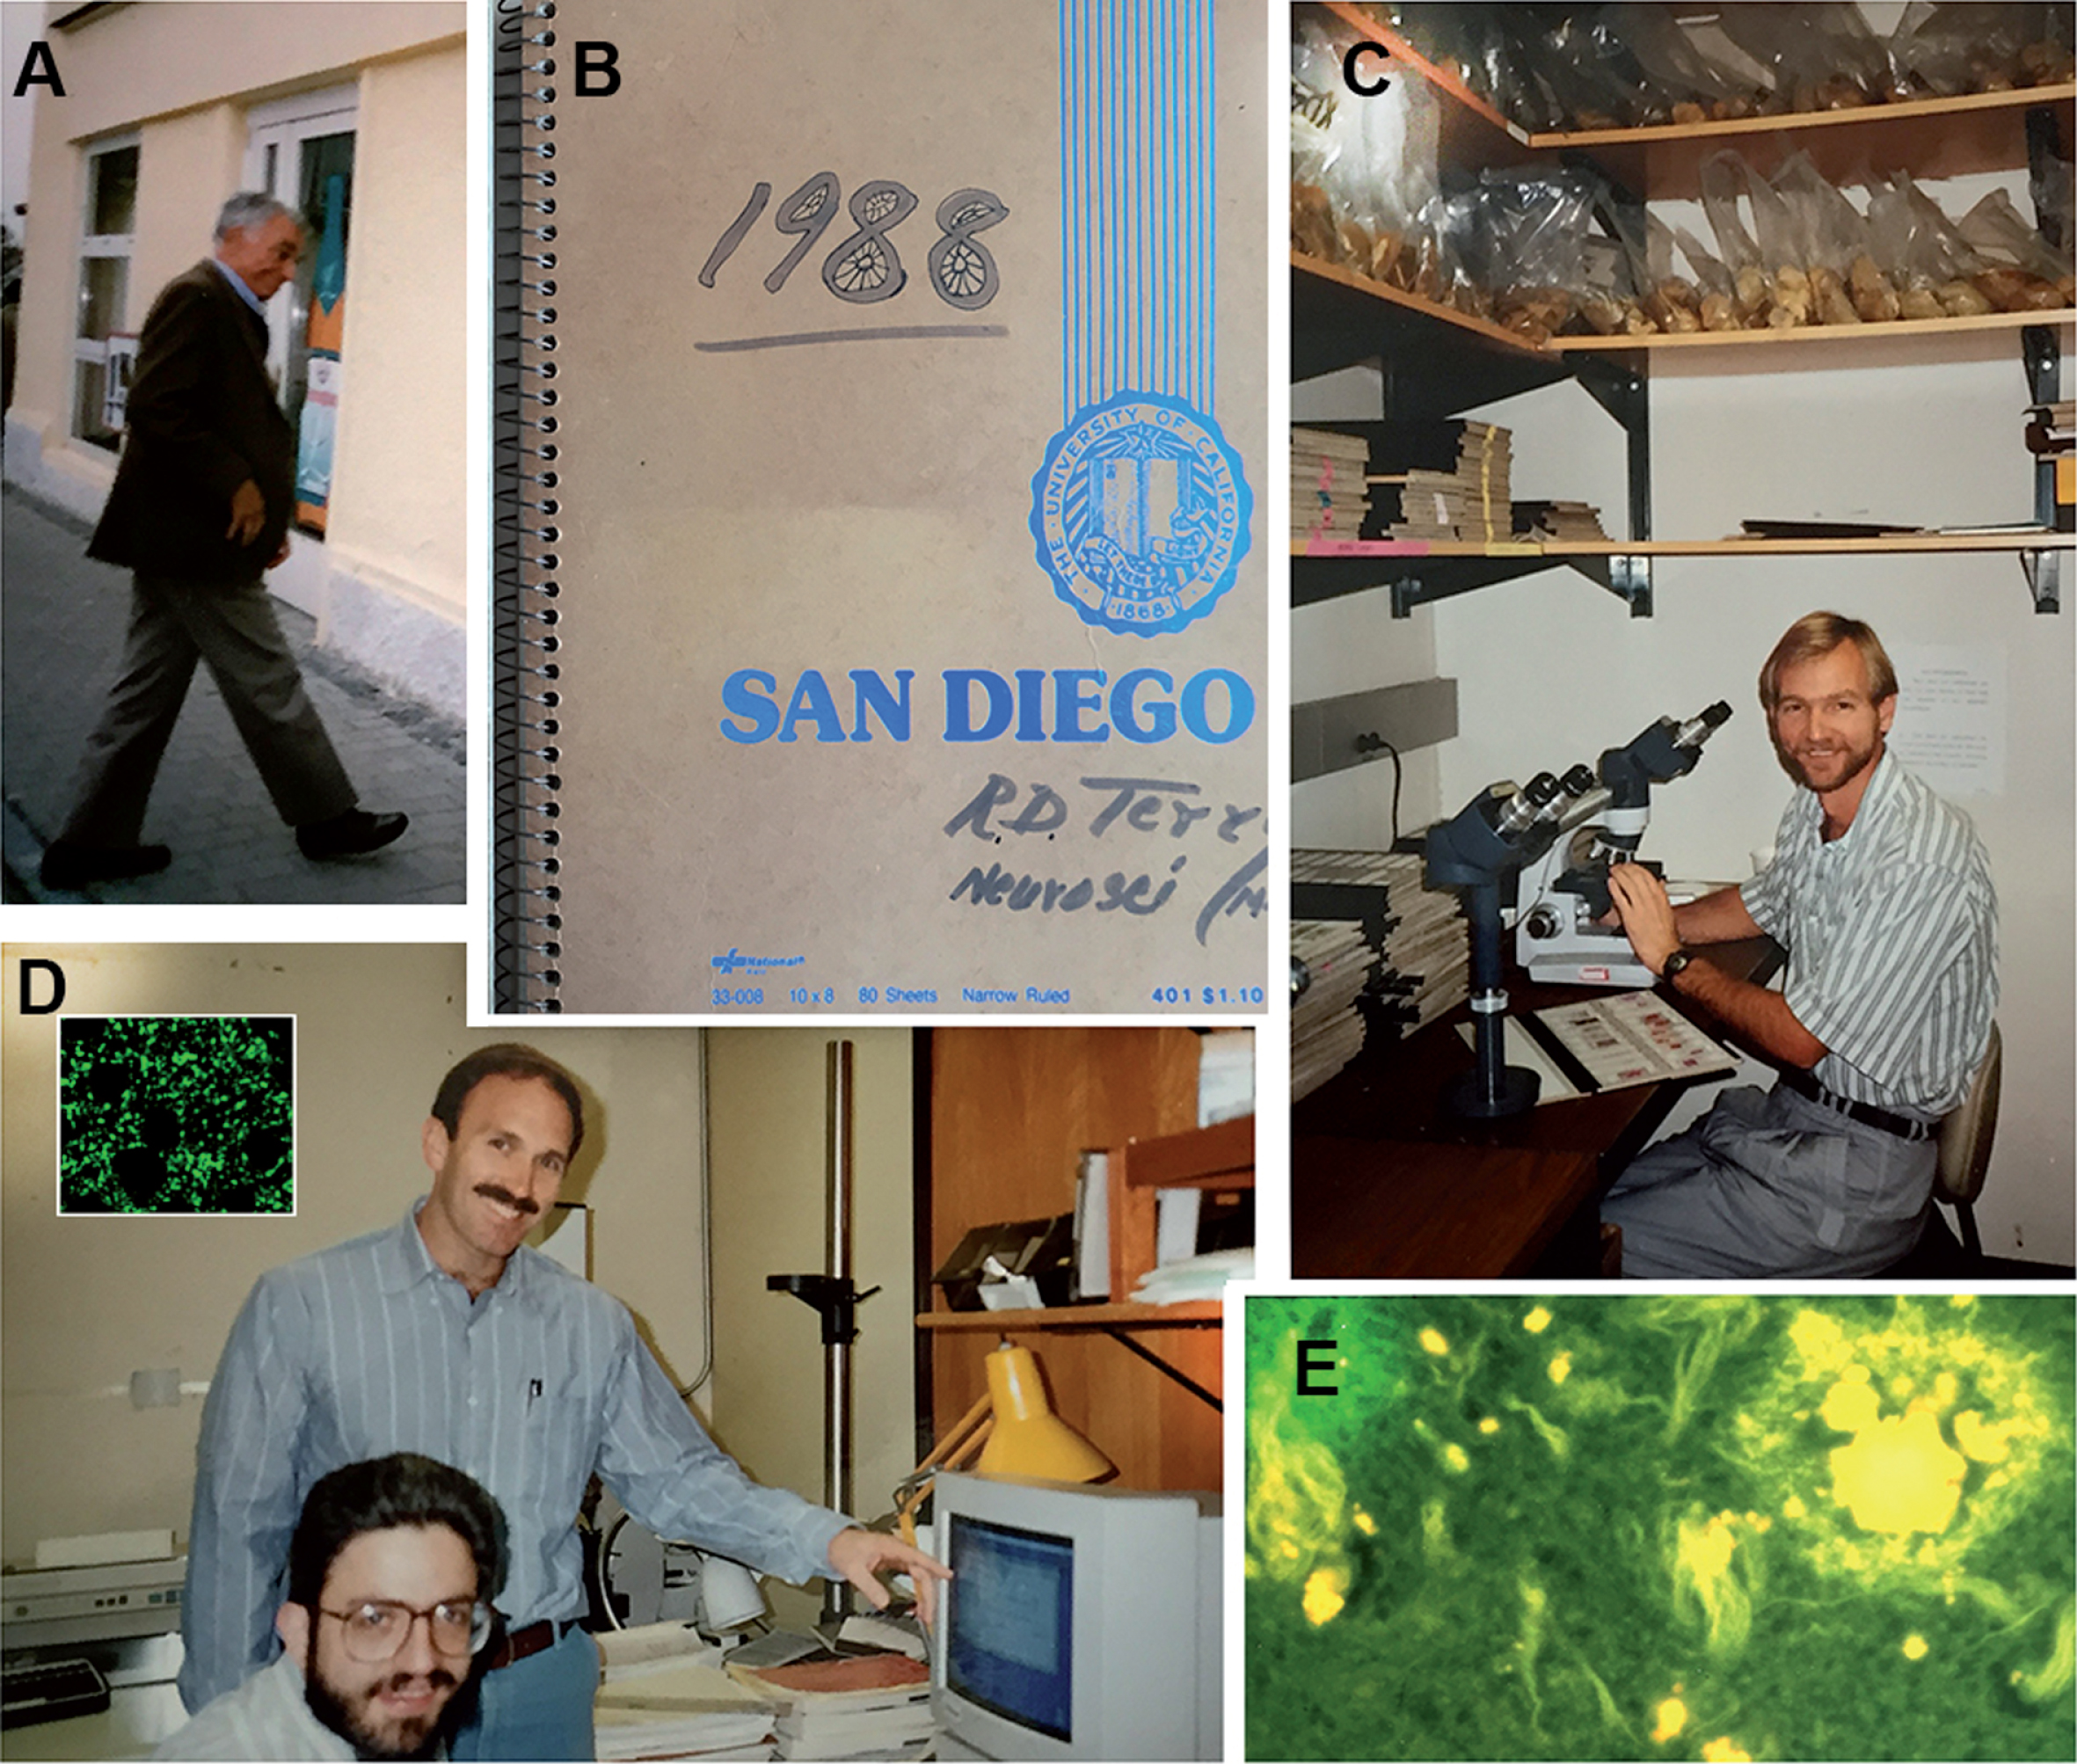 The laboratory of Neuropathology at UCSD in the late 1980s. Bob arriving for a meeting (A), Bob’s notebook from 1988 (B), Larry Hansen at the Alzheimer’s Disease Research Center brain bank analyzing the samples (C), Richard DeTeresa and Eliezer Masliah at the digital system analyzing the first laser confocal images of synapses (synaptophysin immunolabeled) from an Alzheimer’s disease brain (D), Bob Terry’s classical Thioflavine S image of plaques and tangles (E).